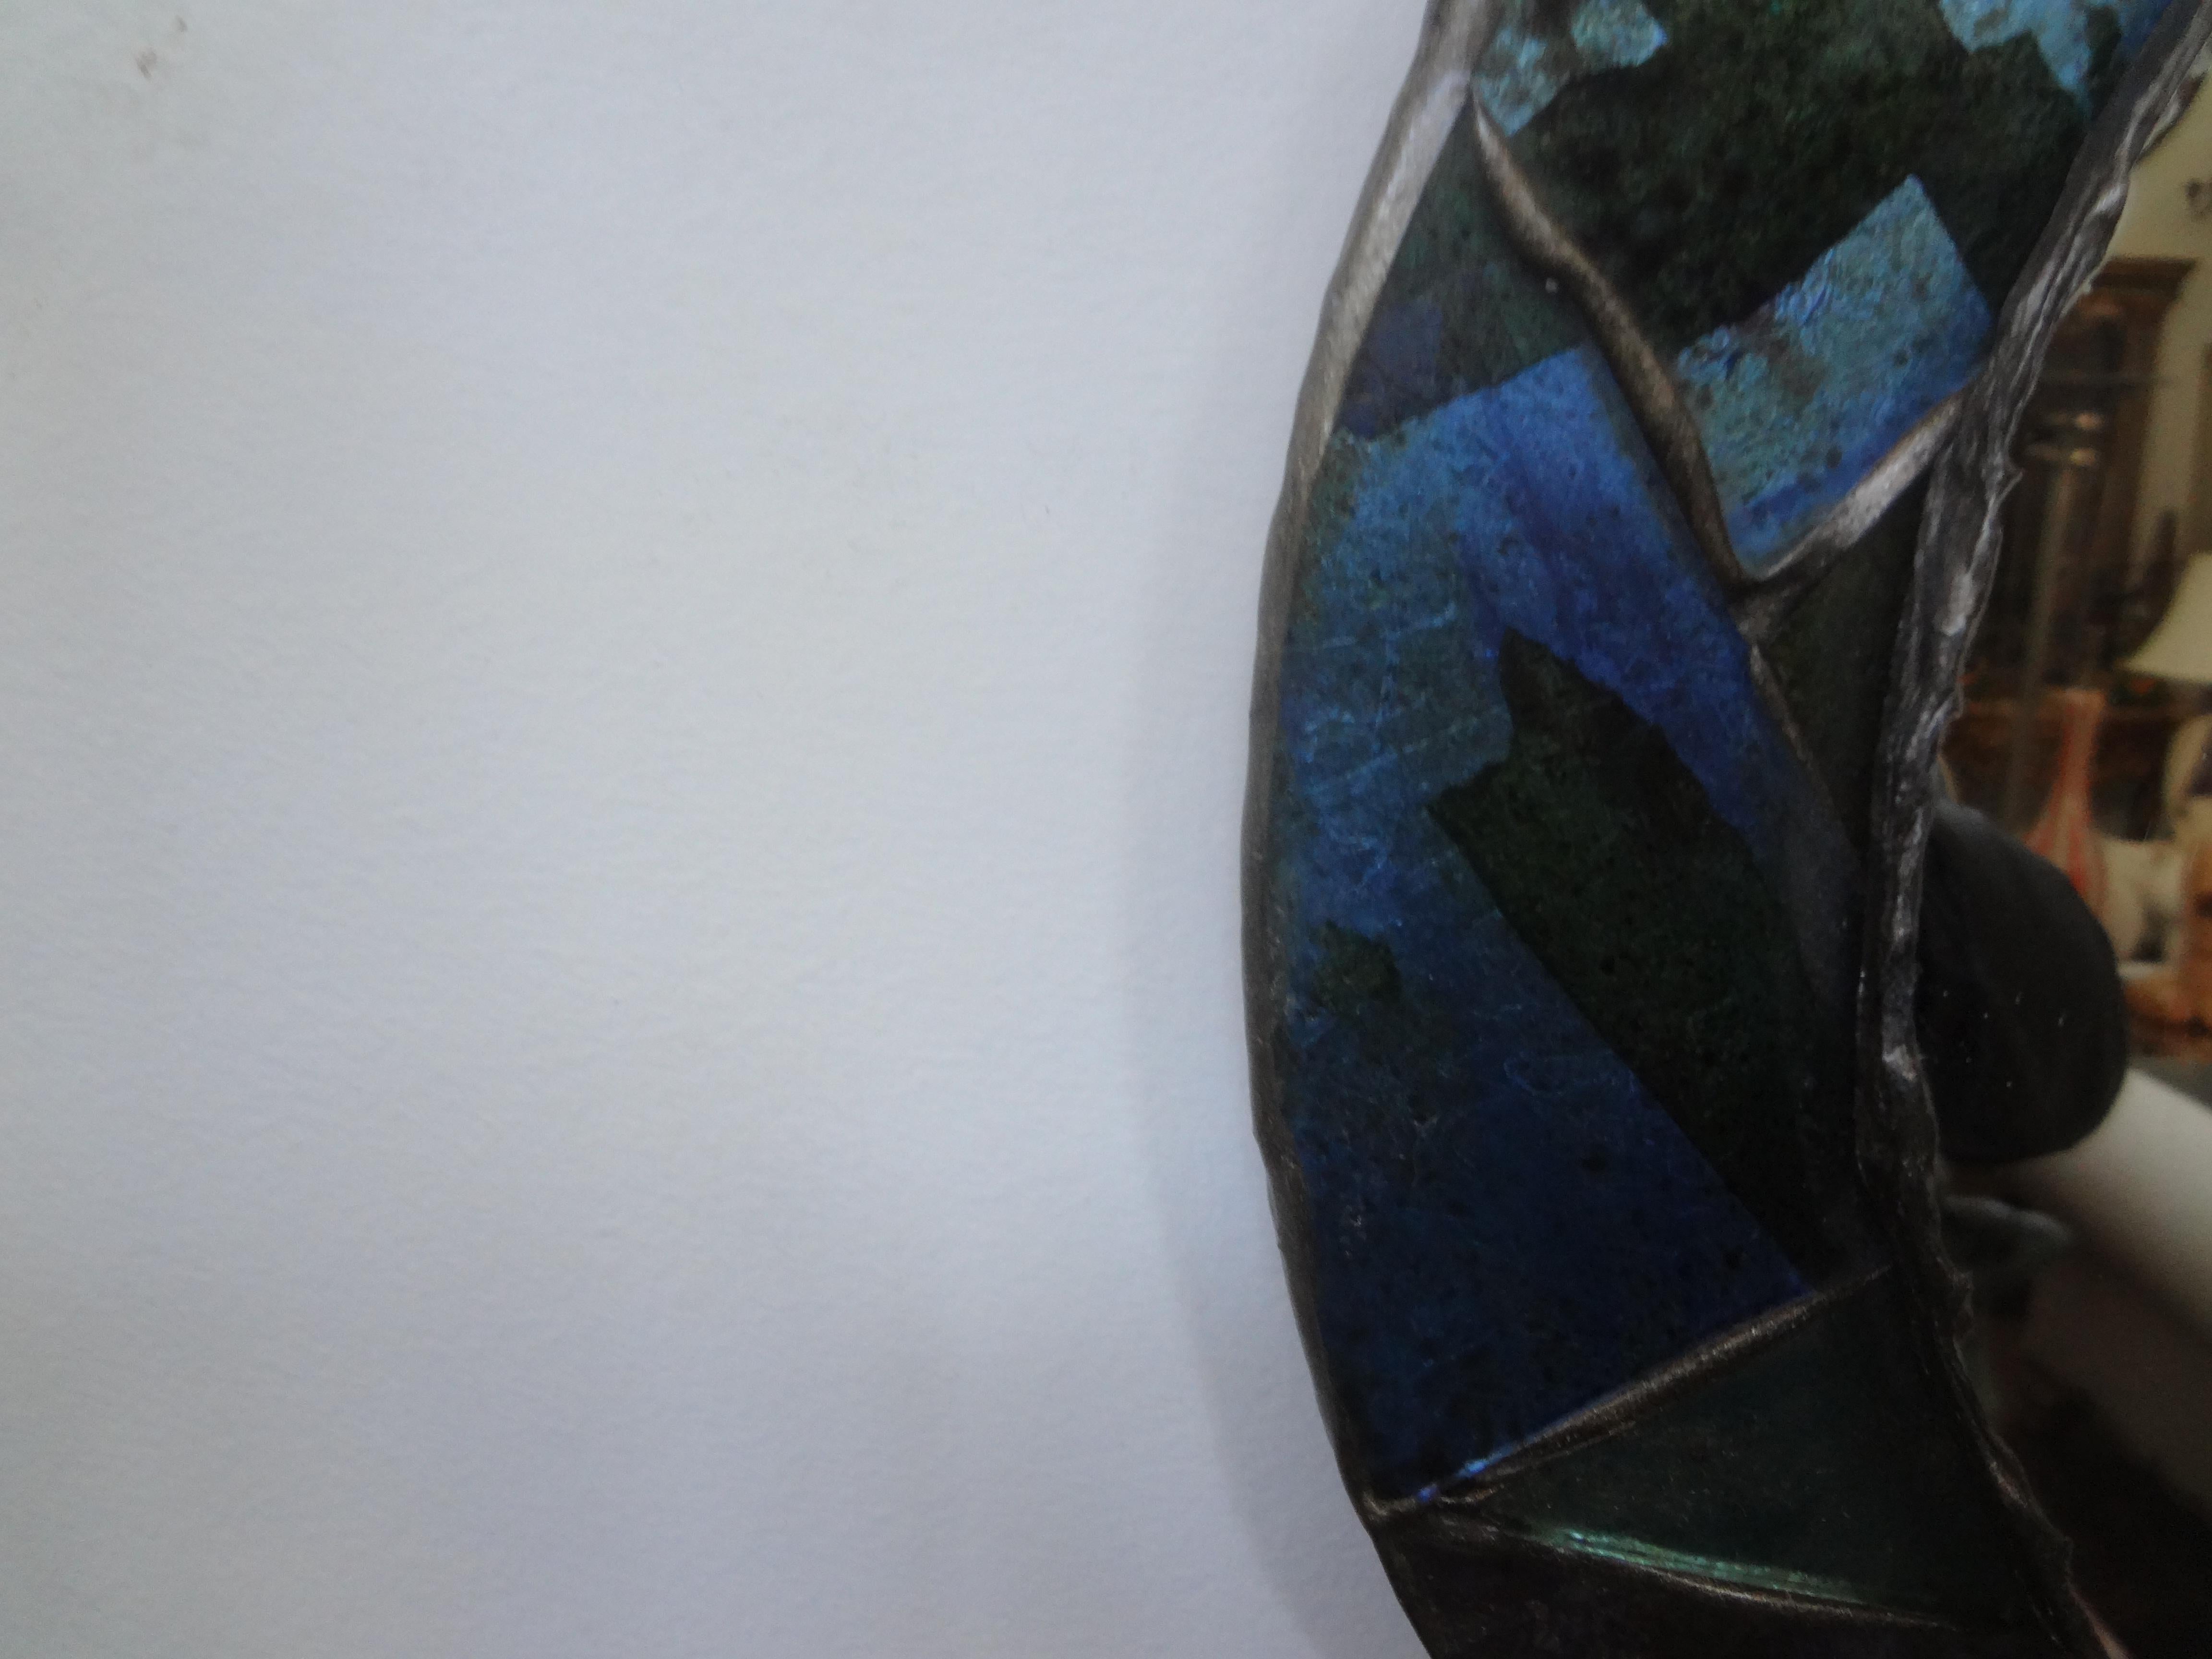 French Modern Glass Mosaic Mirror After Francois Lembo.
Our stunning mirror made of leaded mirrored glass in shades of blues and greens is very similar to the work of Francois Lembo. This French modern mirror would look great grouped together with